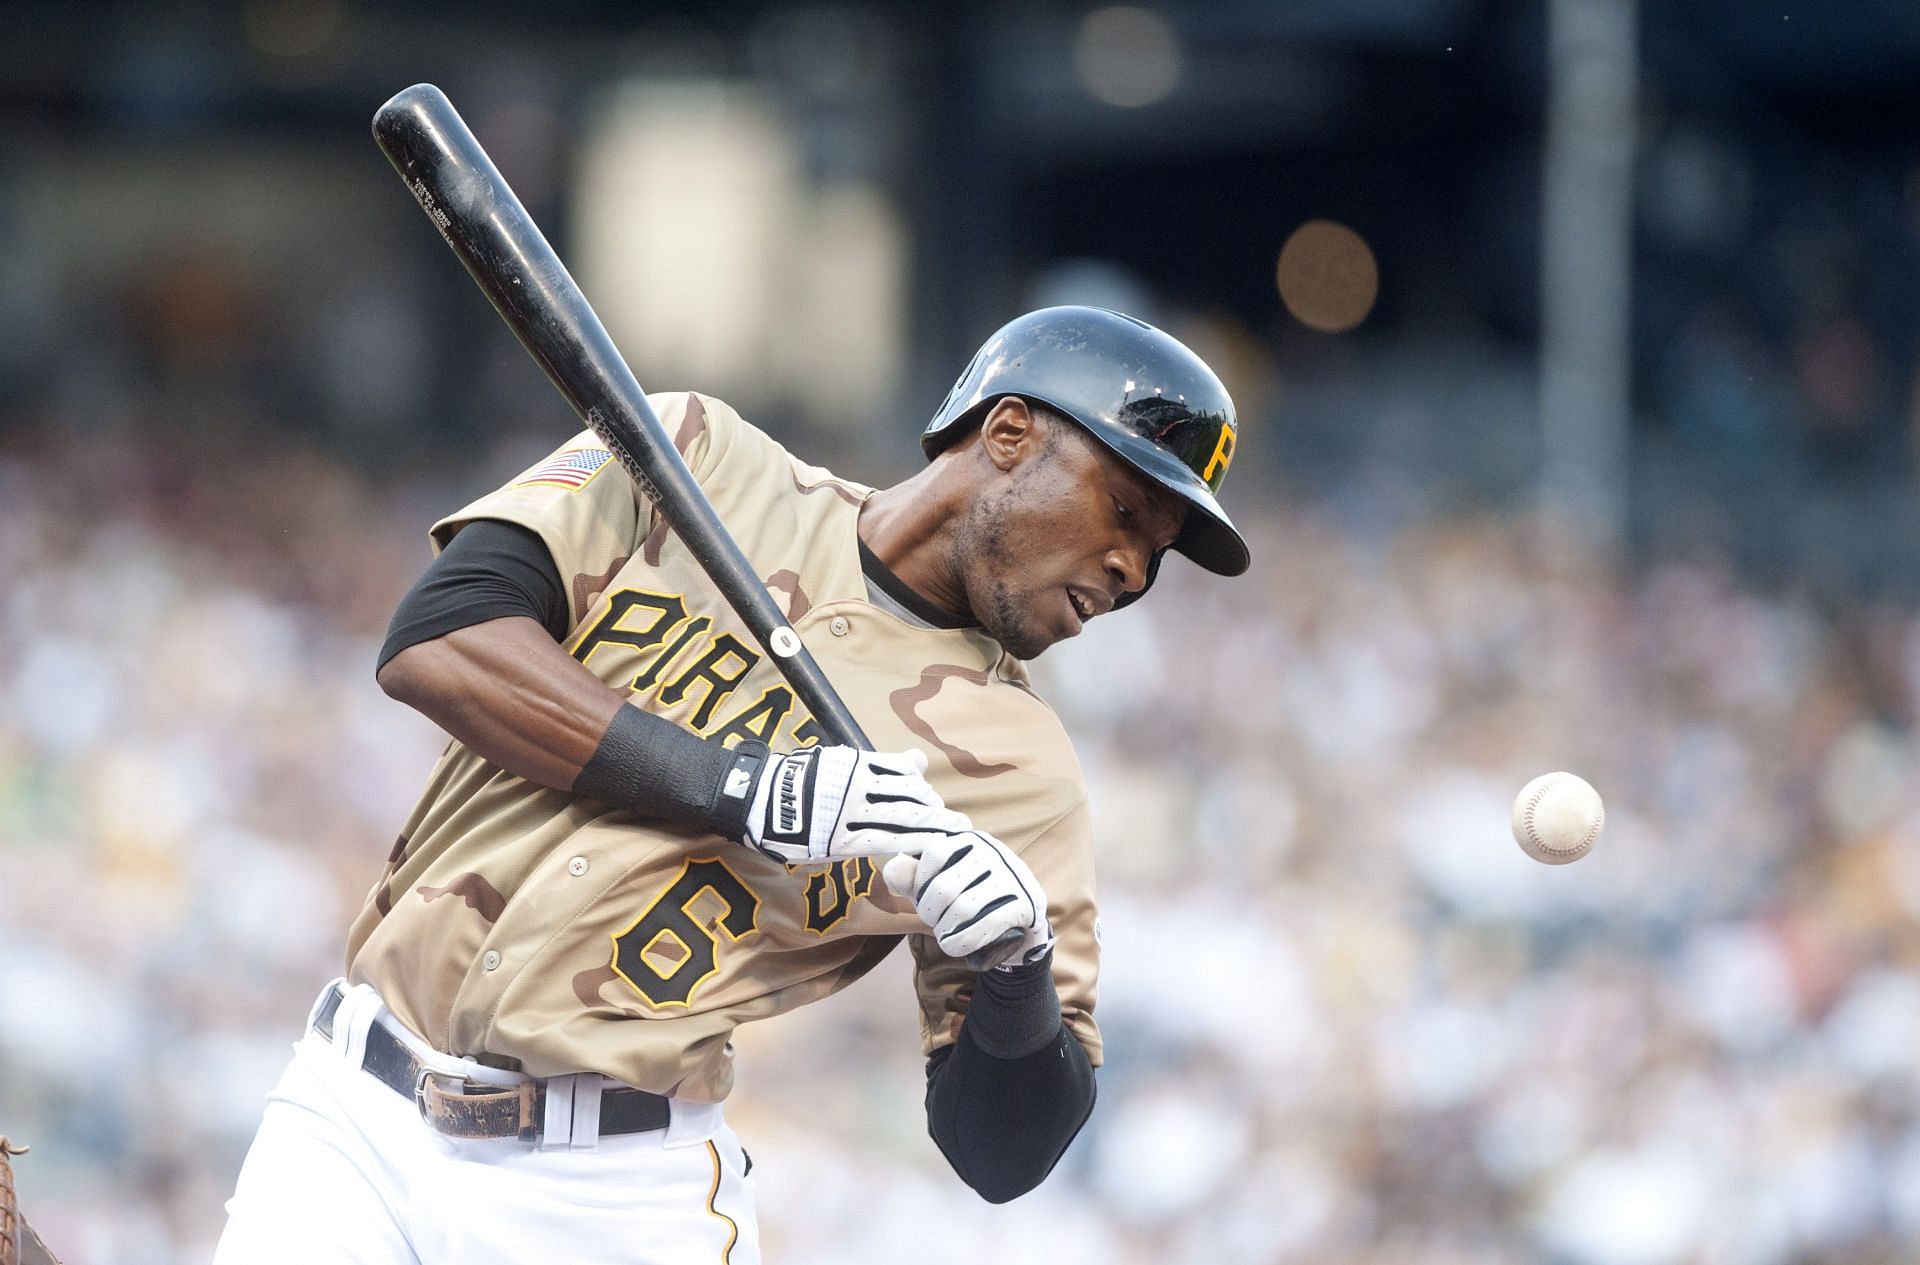 Cards get drop on Pirates: Starling Marte's excruciating error a